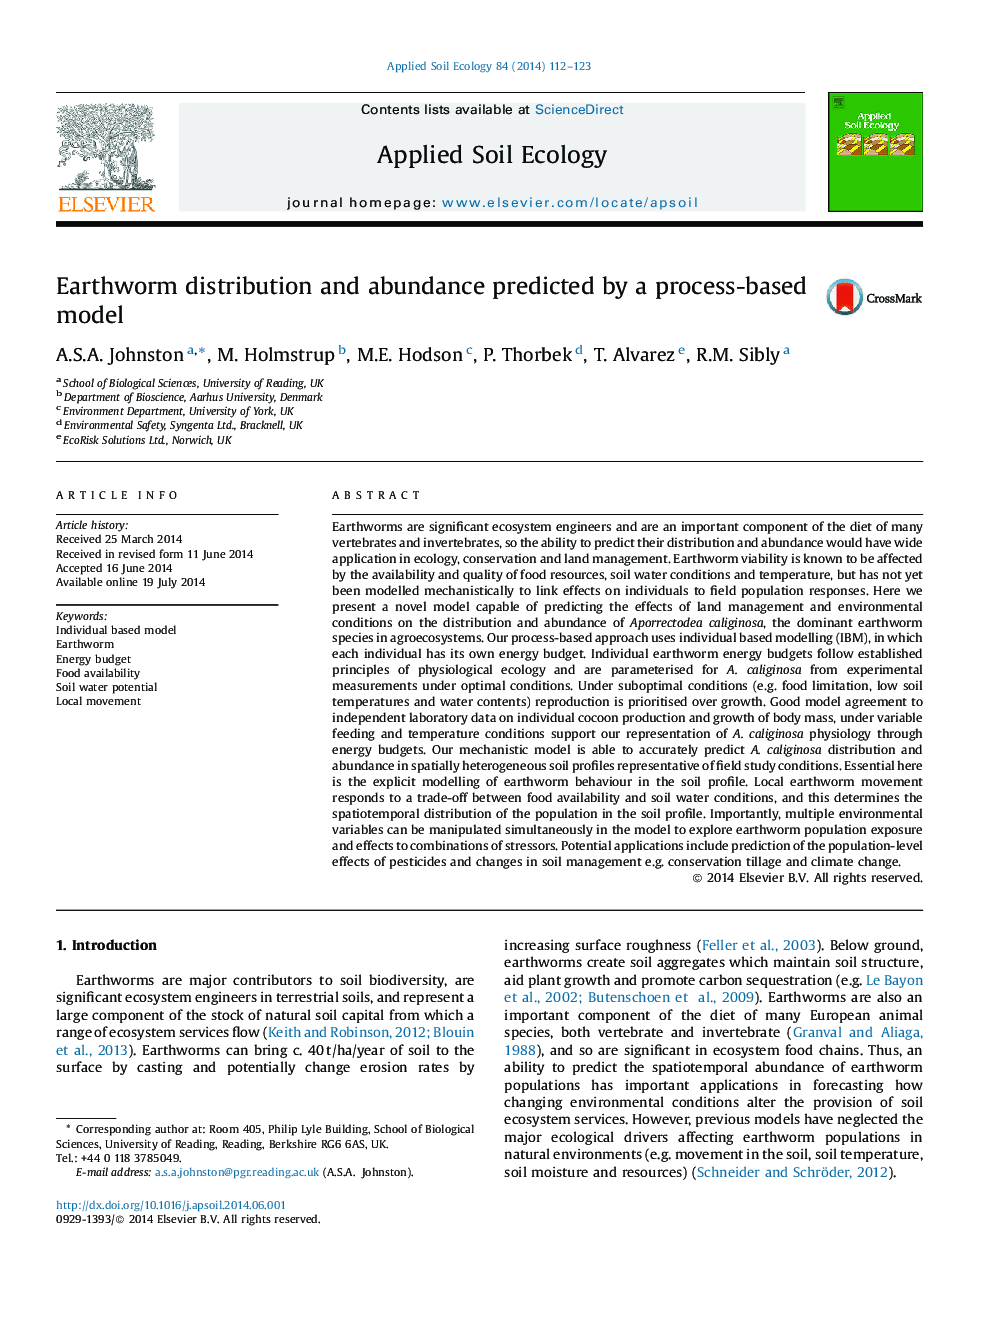 Earthworm distribution and abundance predicted by a process-based model